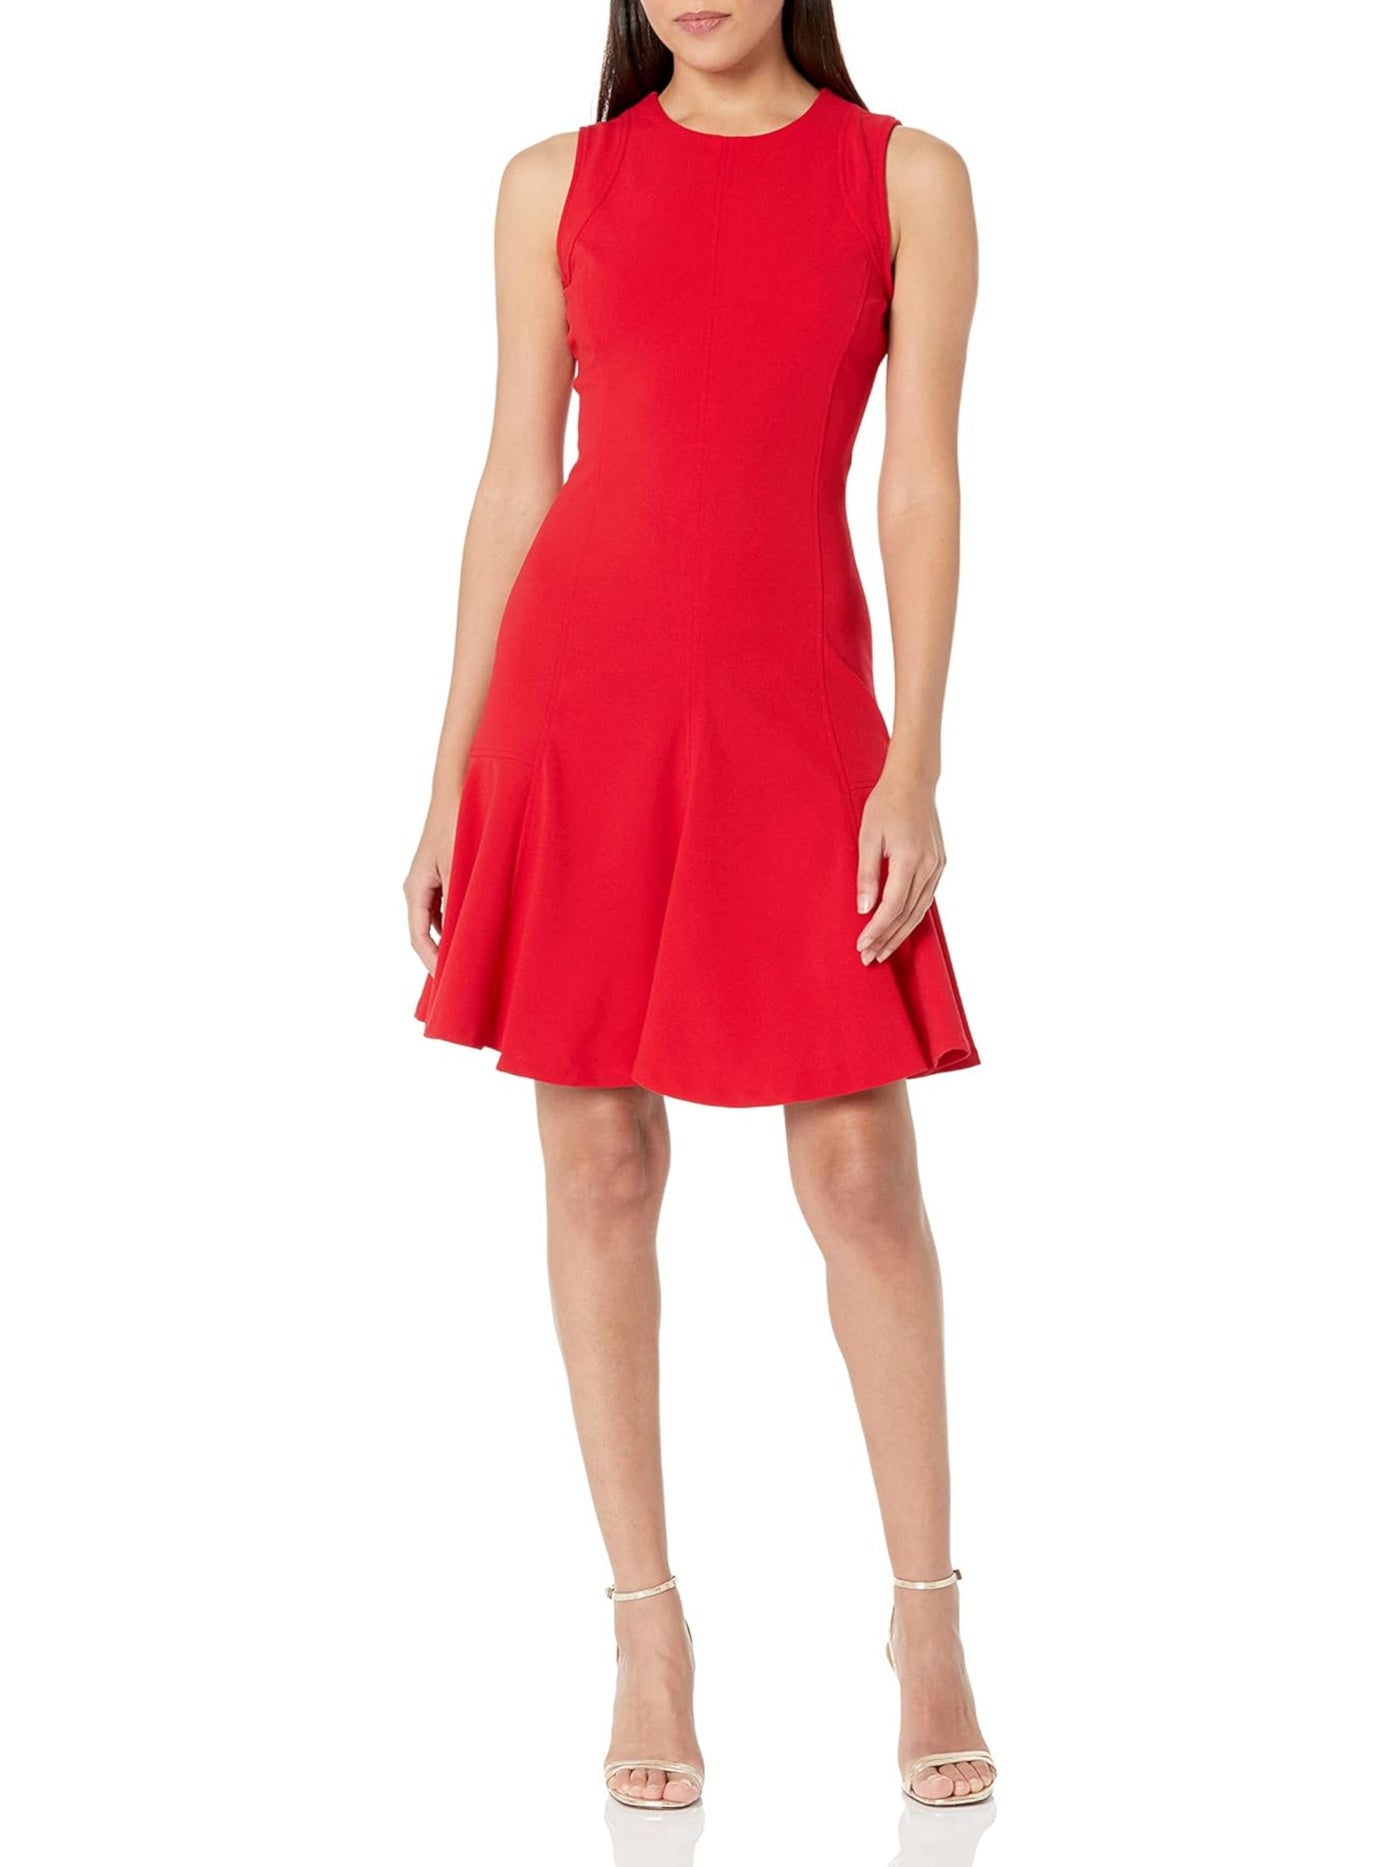 TOMMY HILFIGER Womens Red Zippered Unlined Princess Seams Sleeveless Round Neck Above The Knee Fit + Flare Dress 2